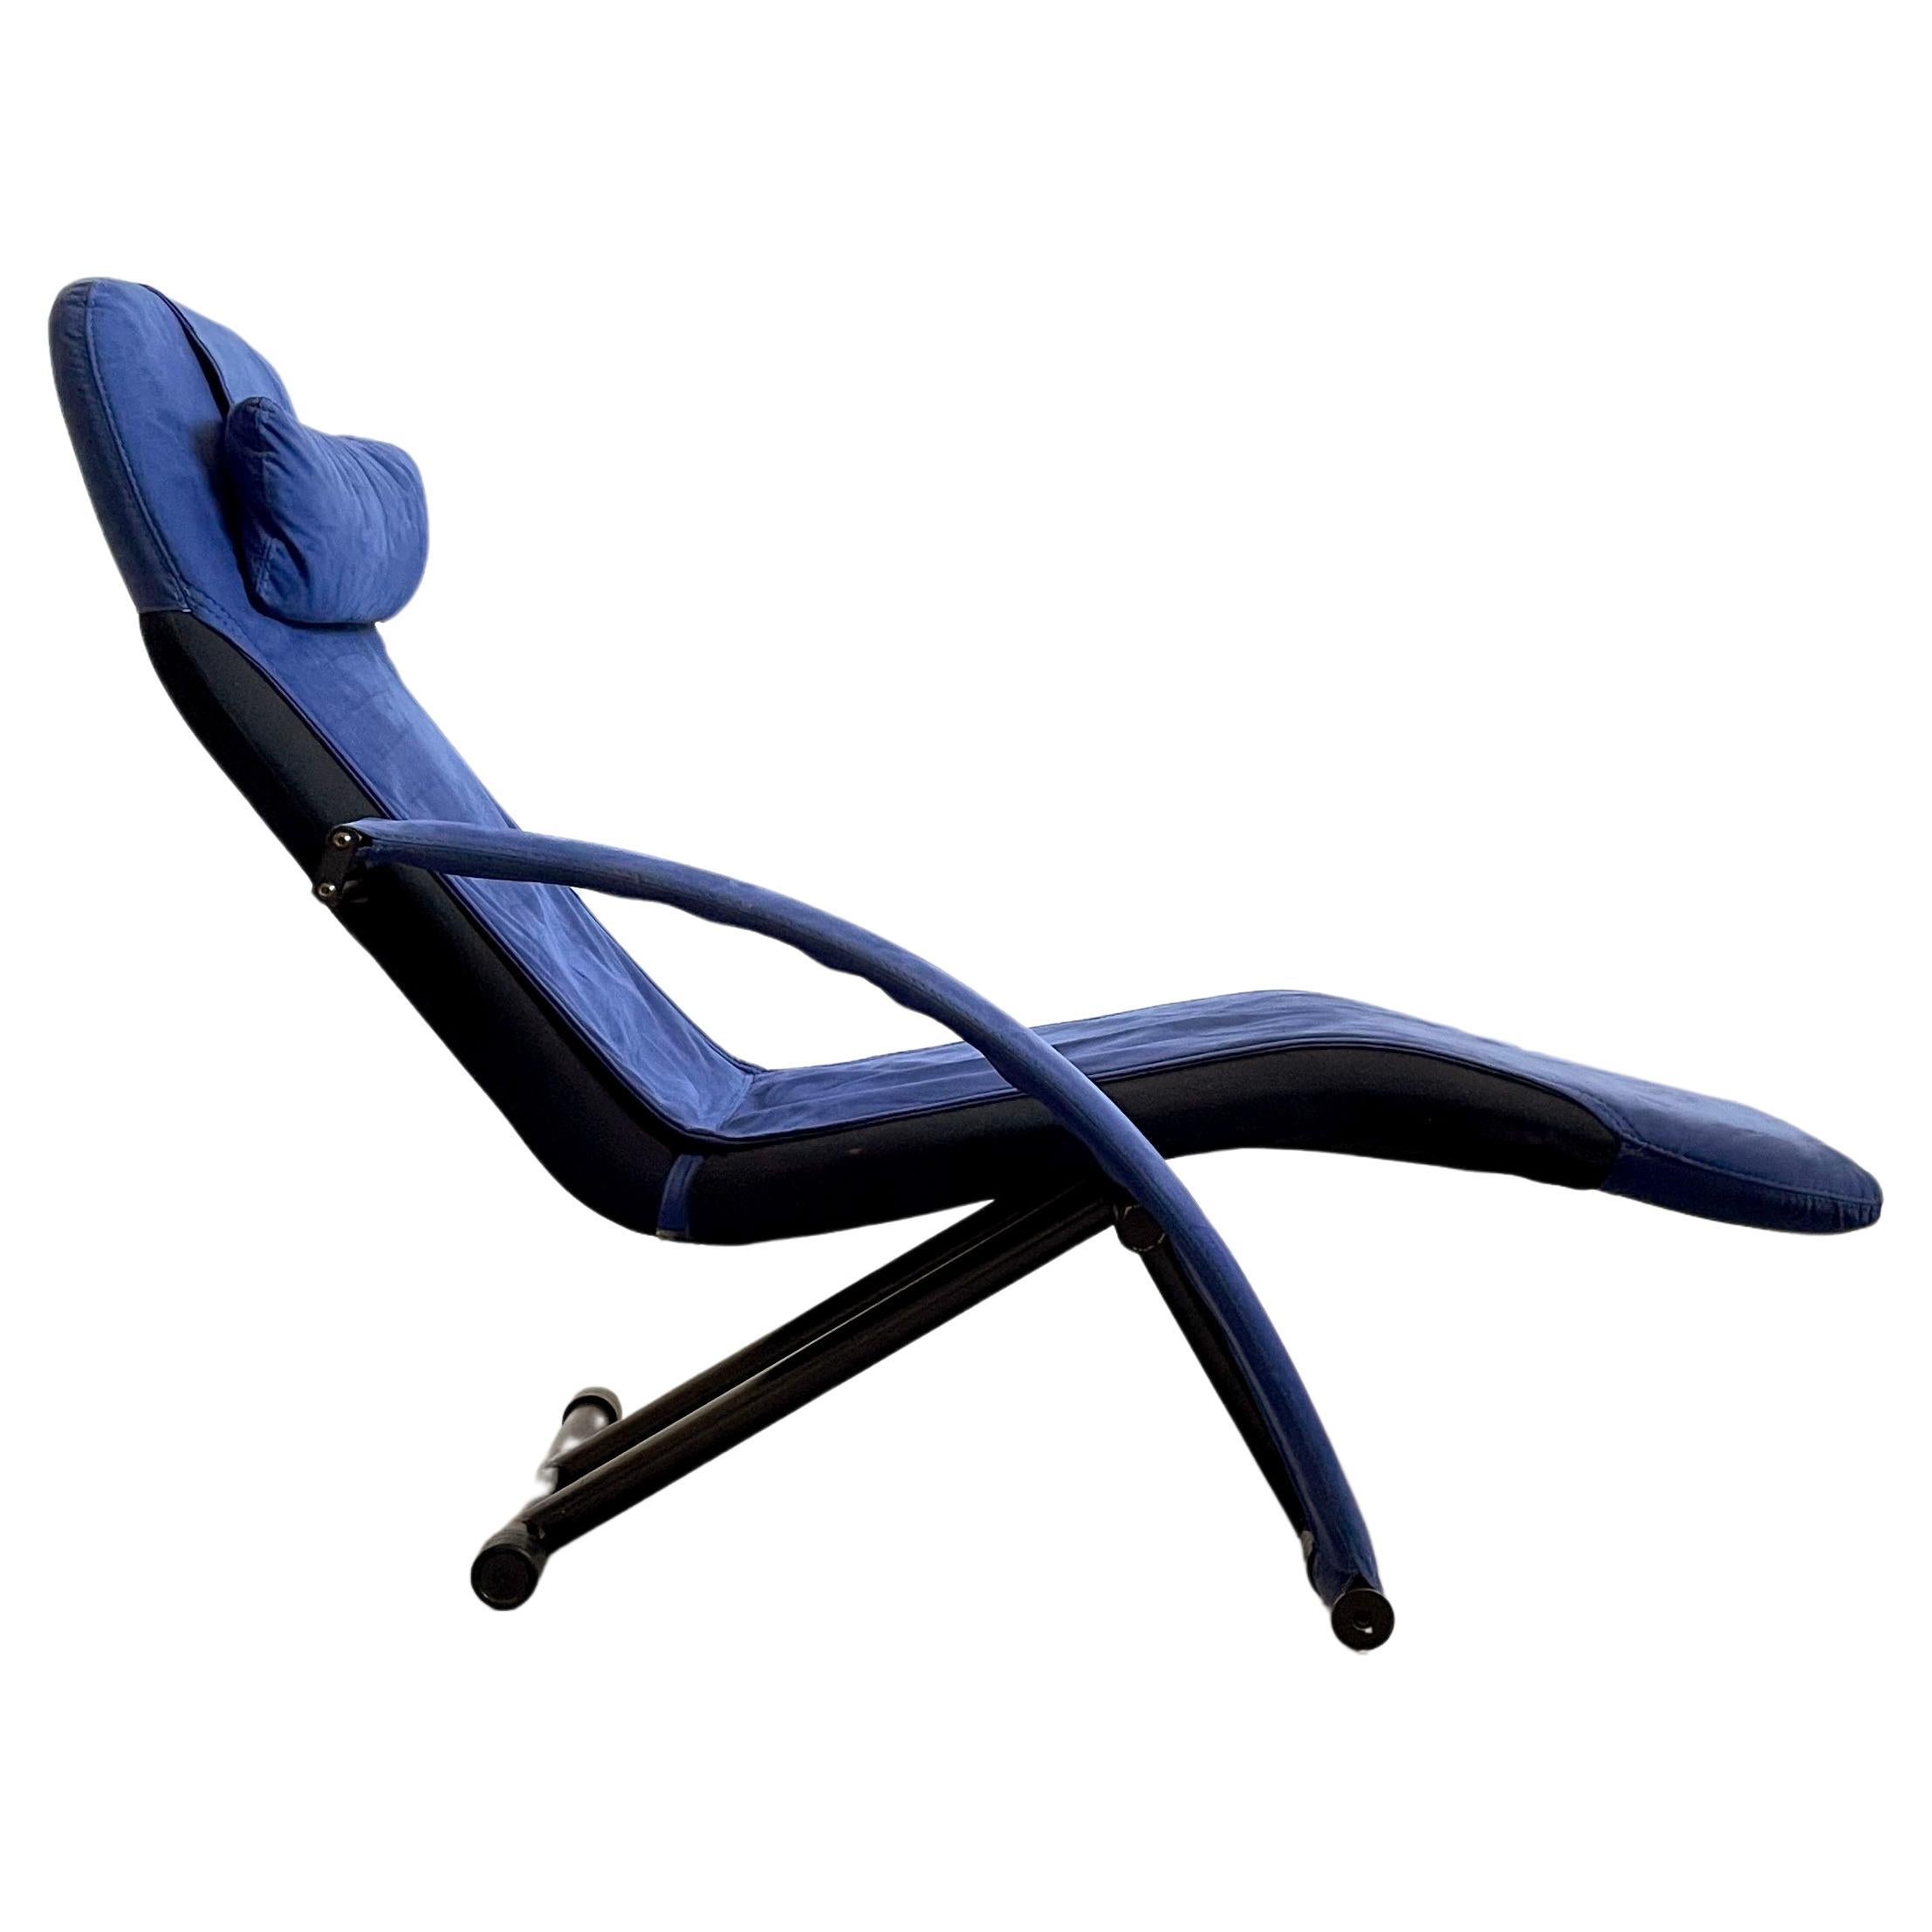 Flexa Lounge Chair by Adriano Piazzesi for Arketipo, 1987 For Sale